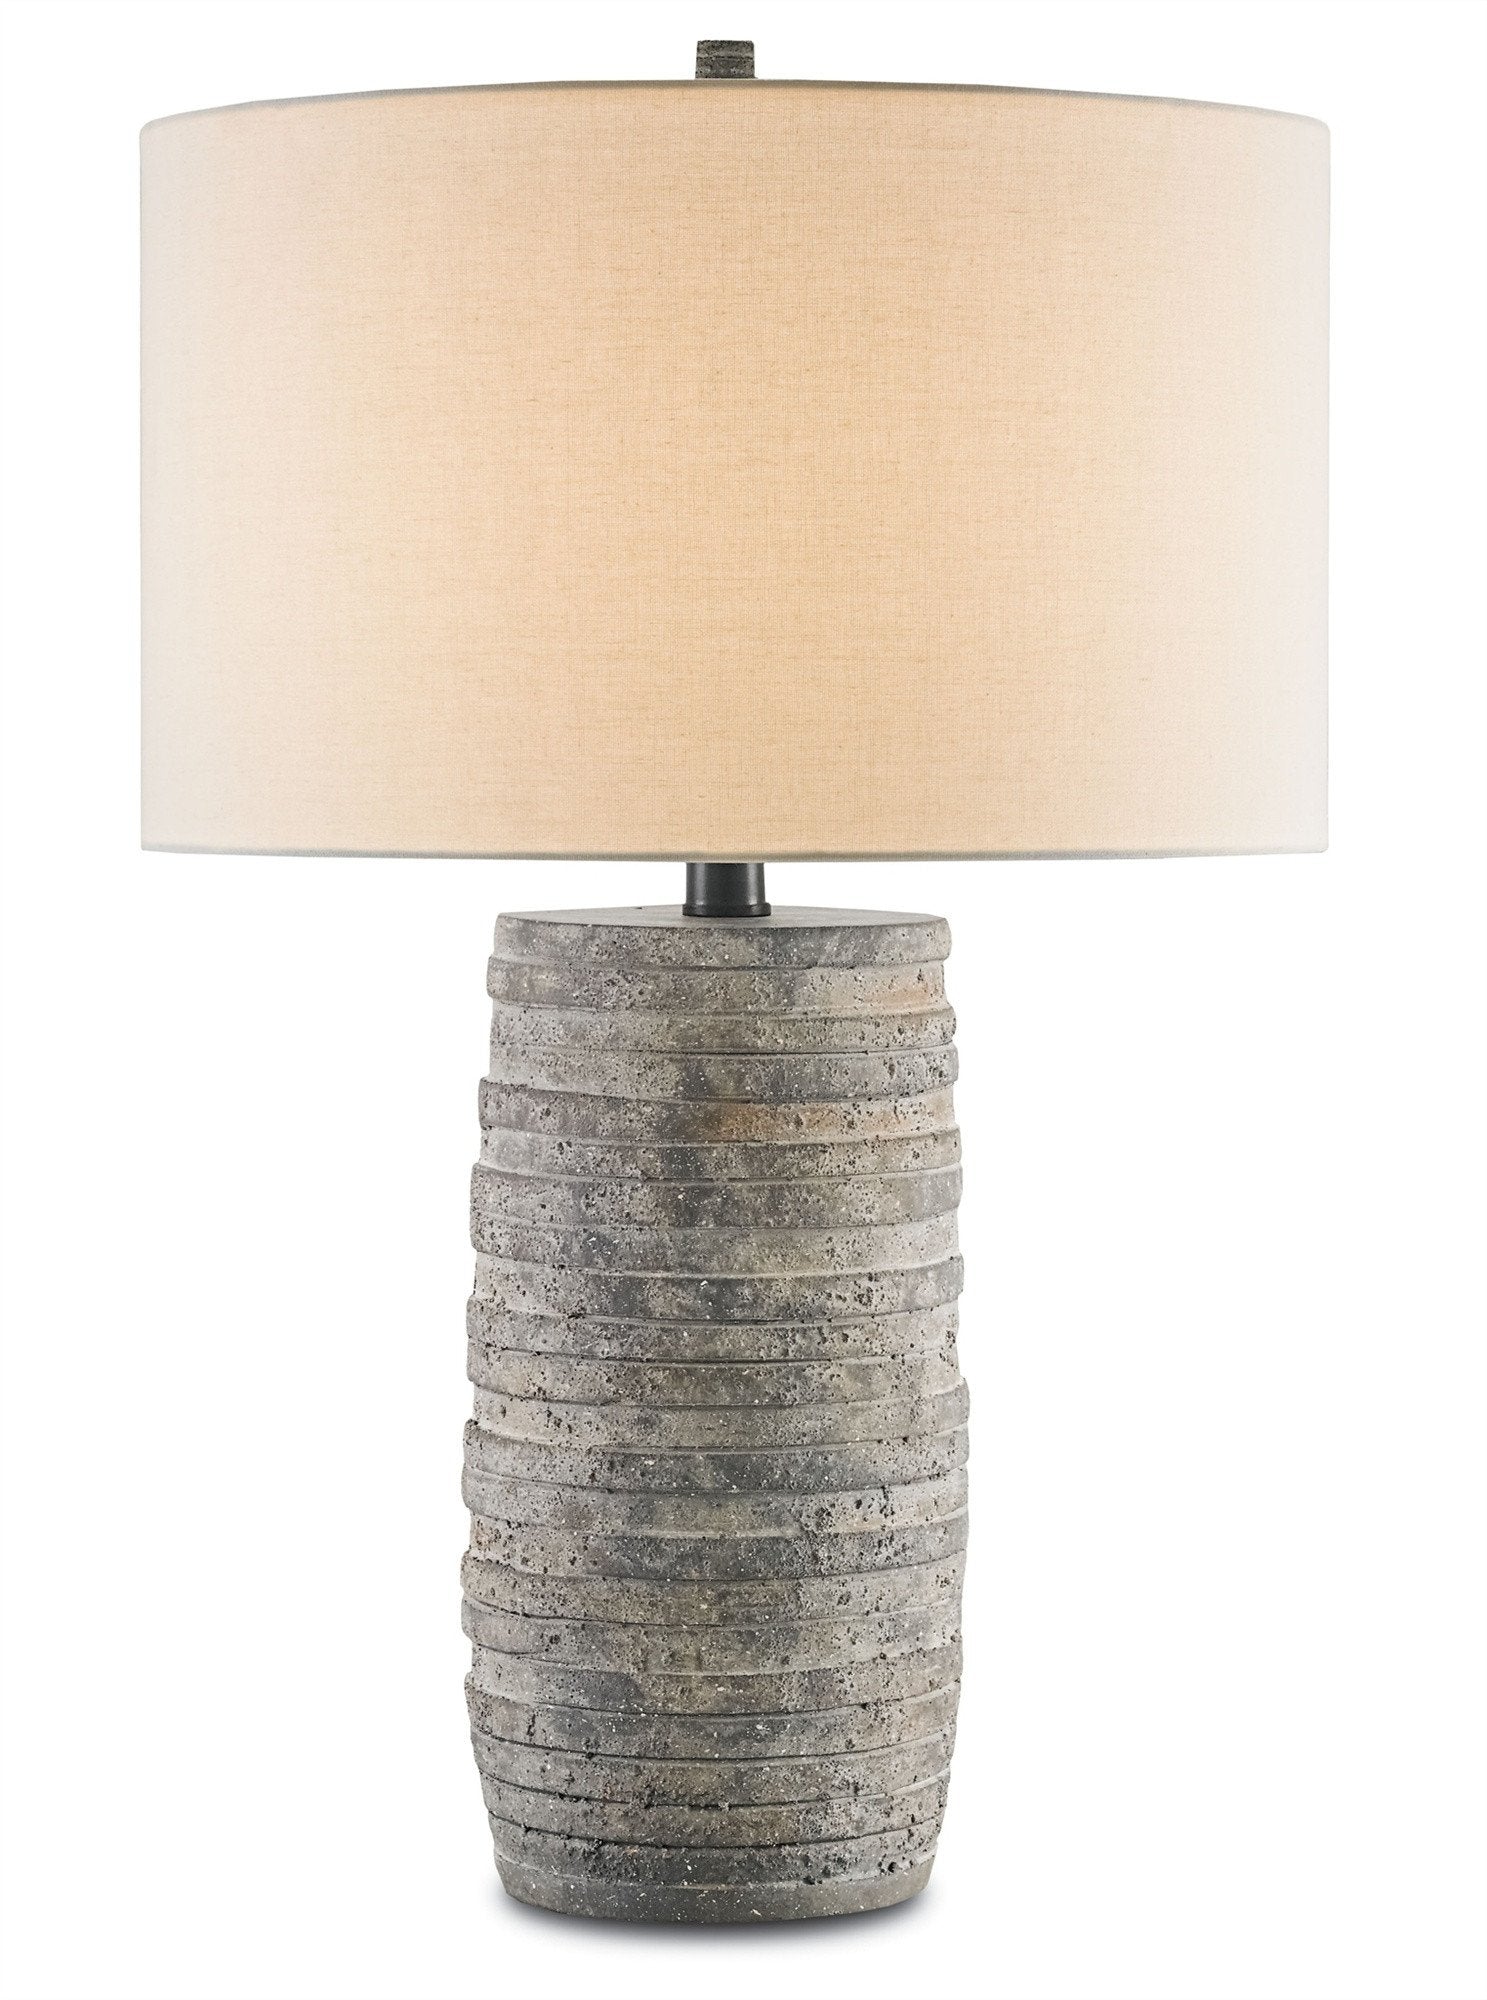 Innkeeper Table Lamp design by Currey and Company